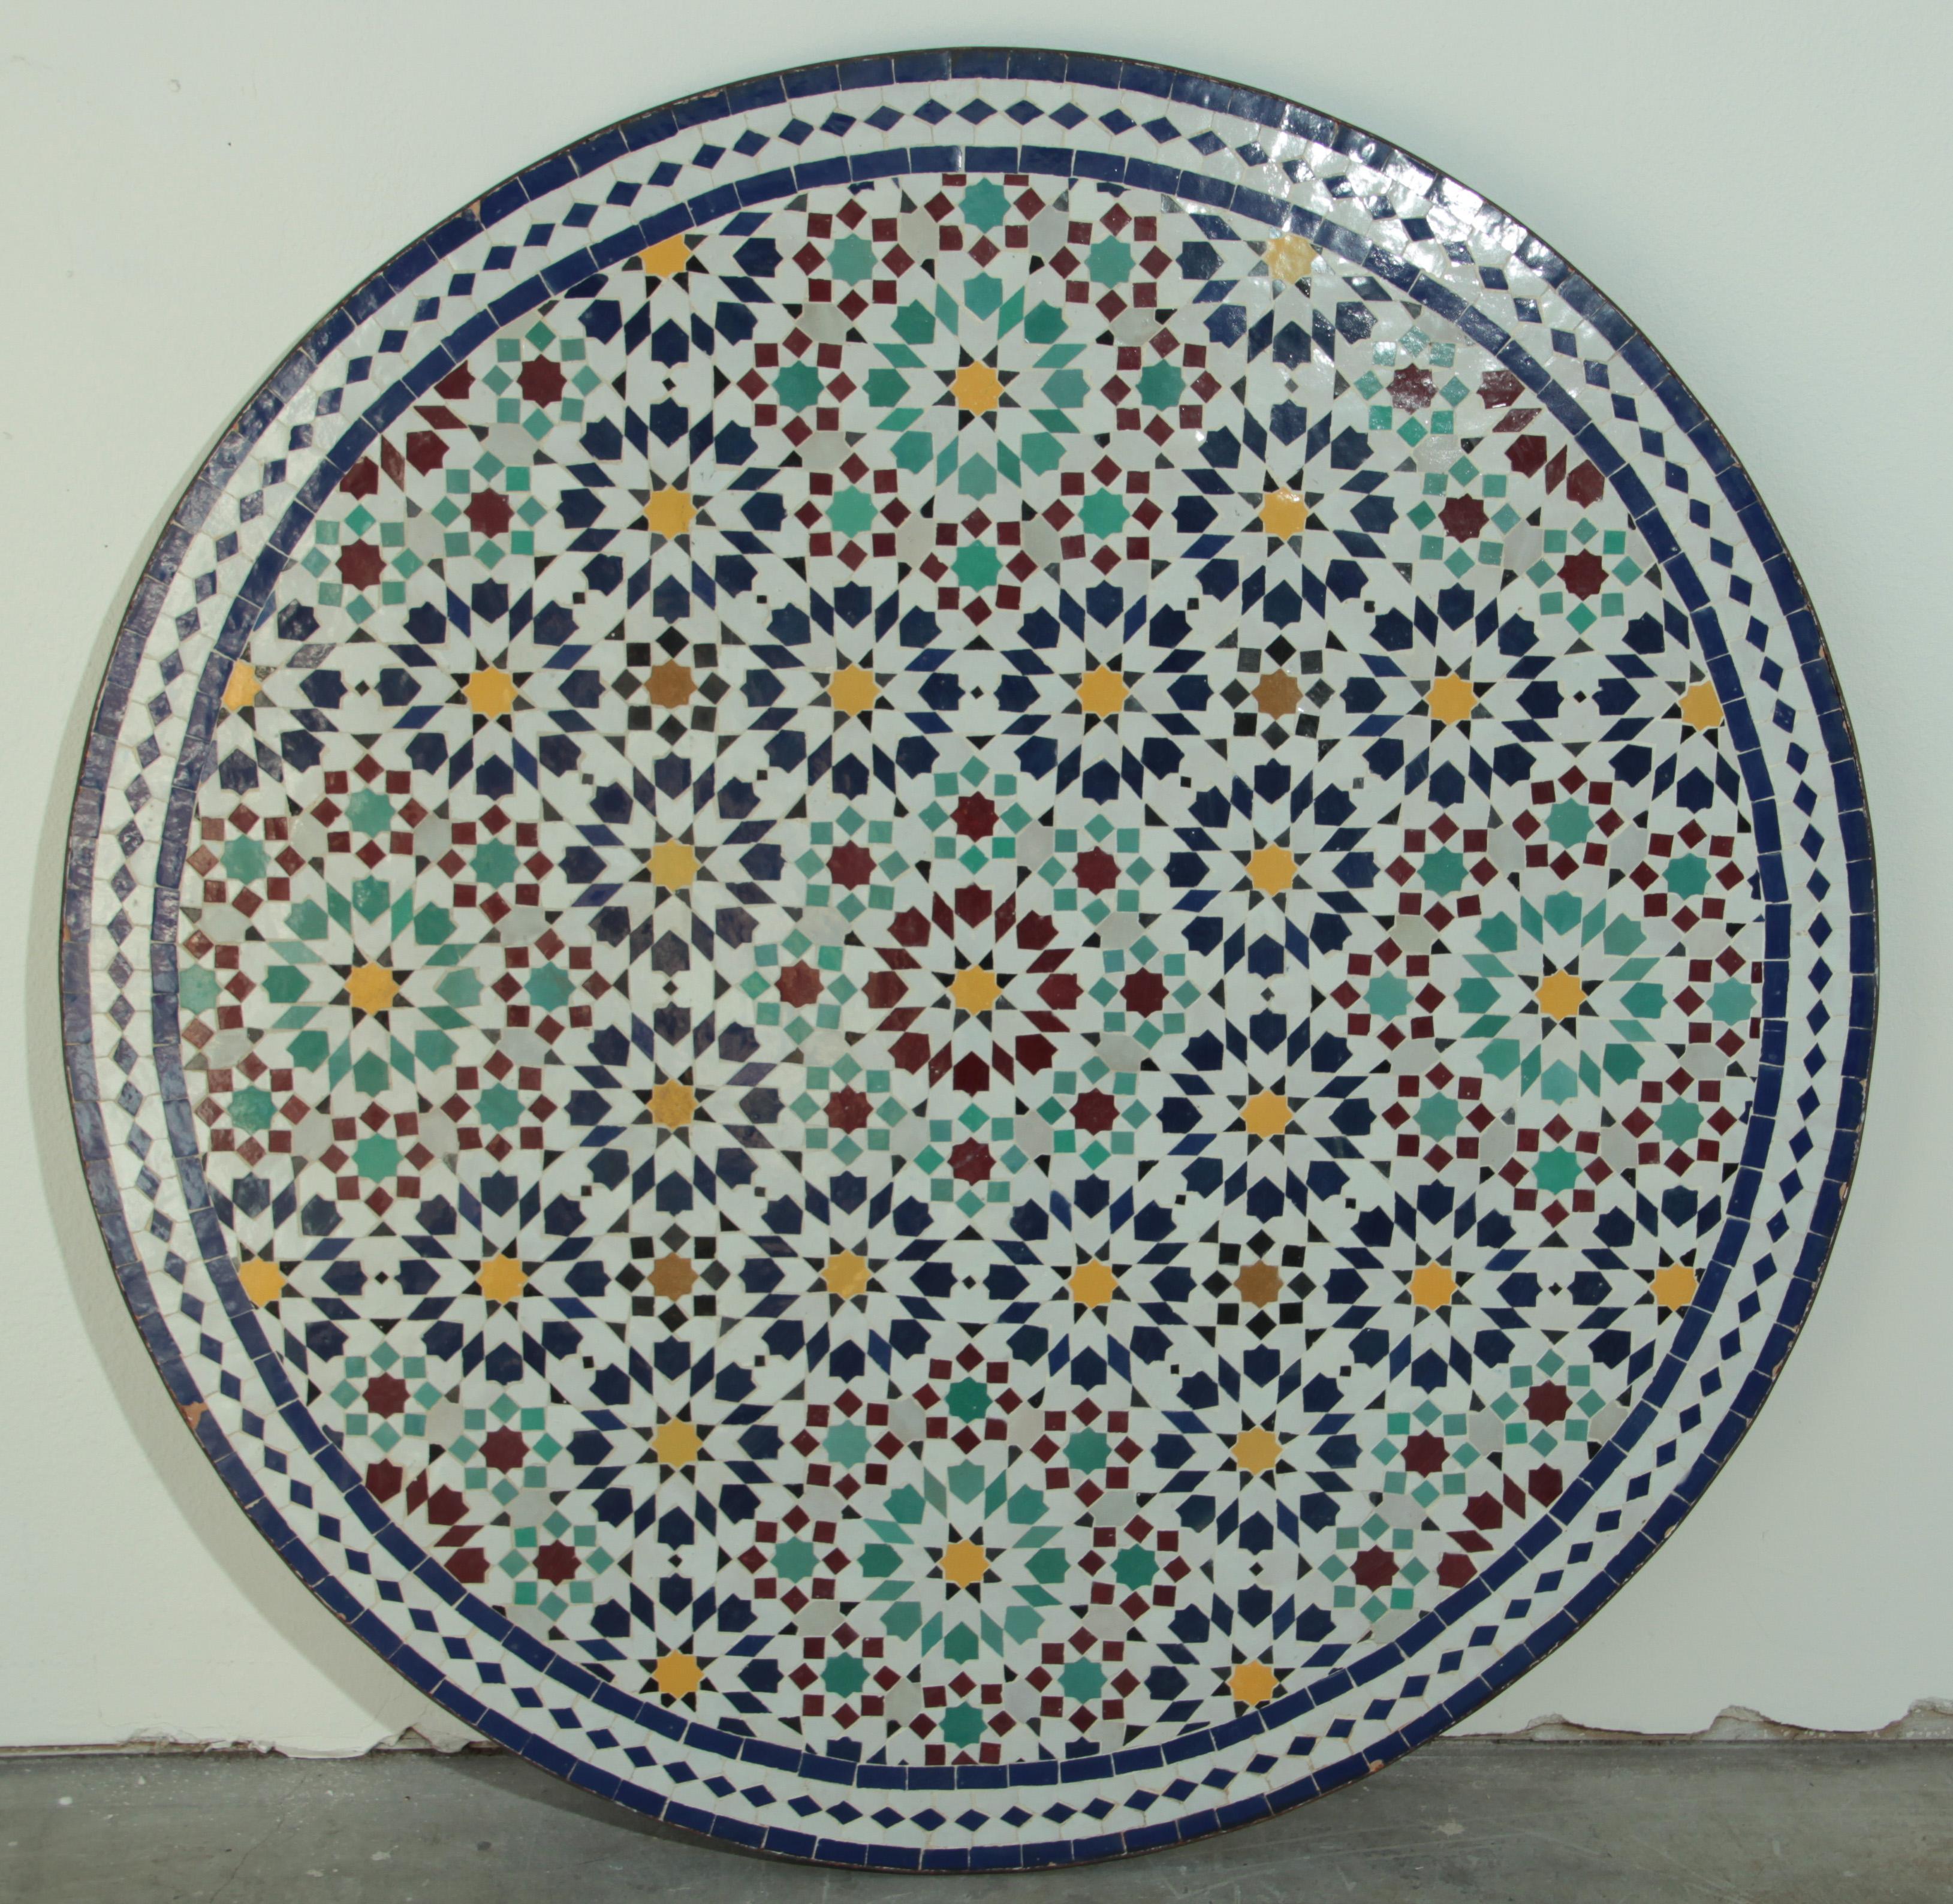 Moroccan Round Mosaic Outdoor Tile Table in Fez Moorish Design For Sale 5